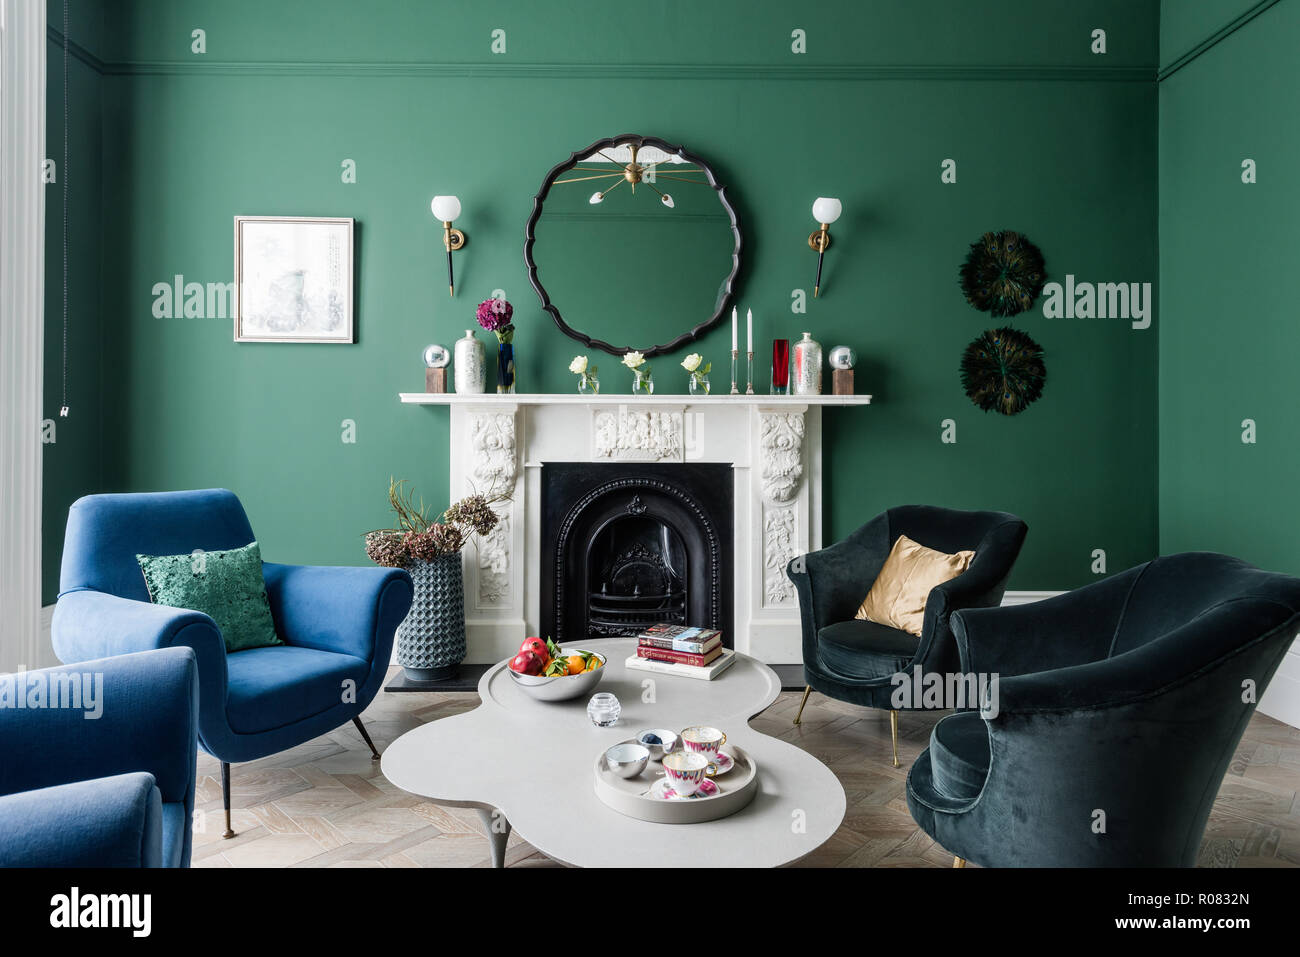 Green and blue toned living room Stock Photo